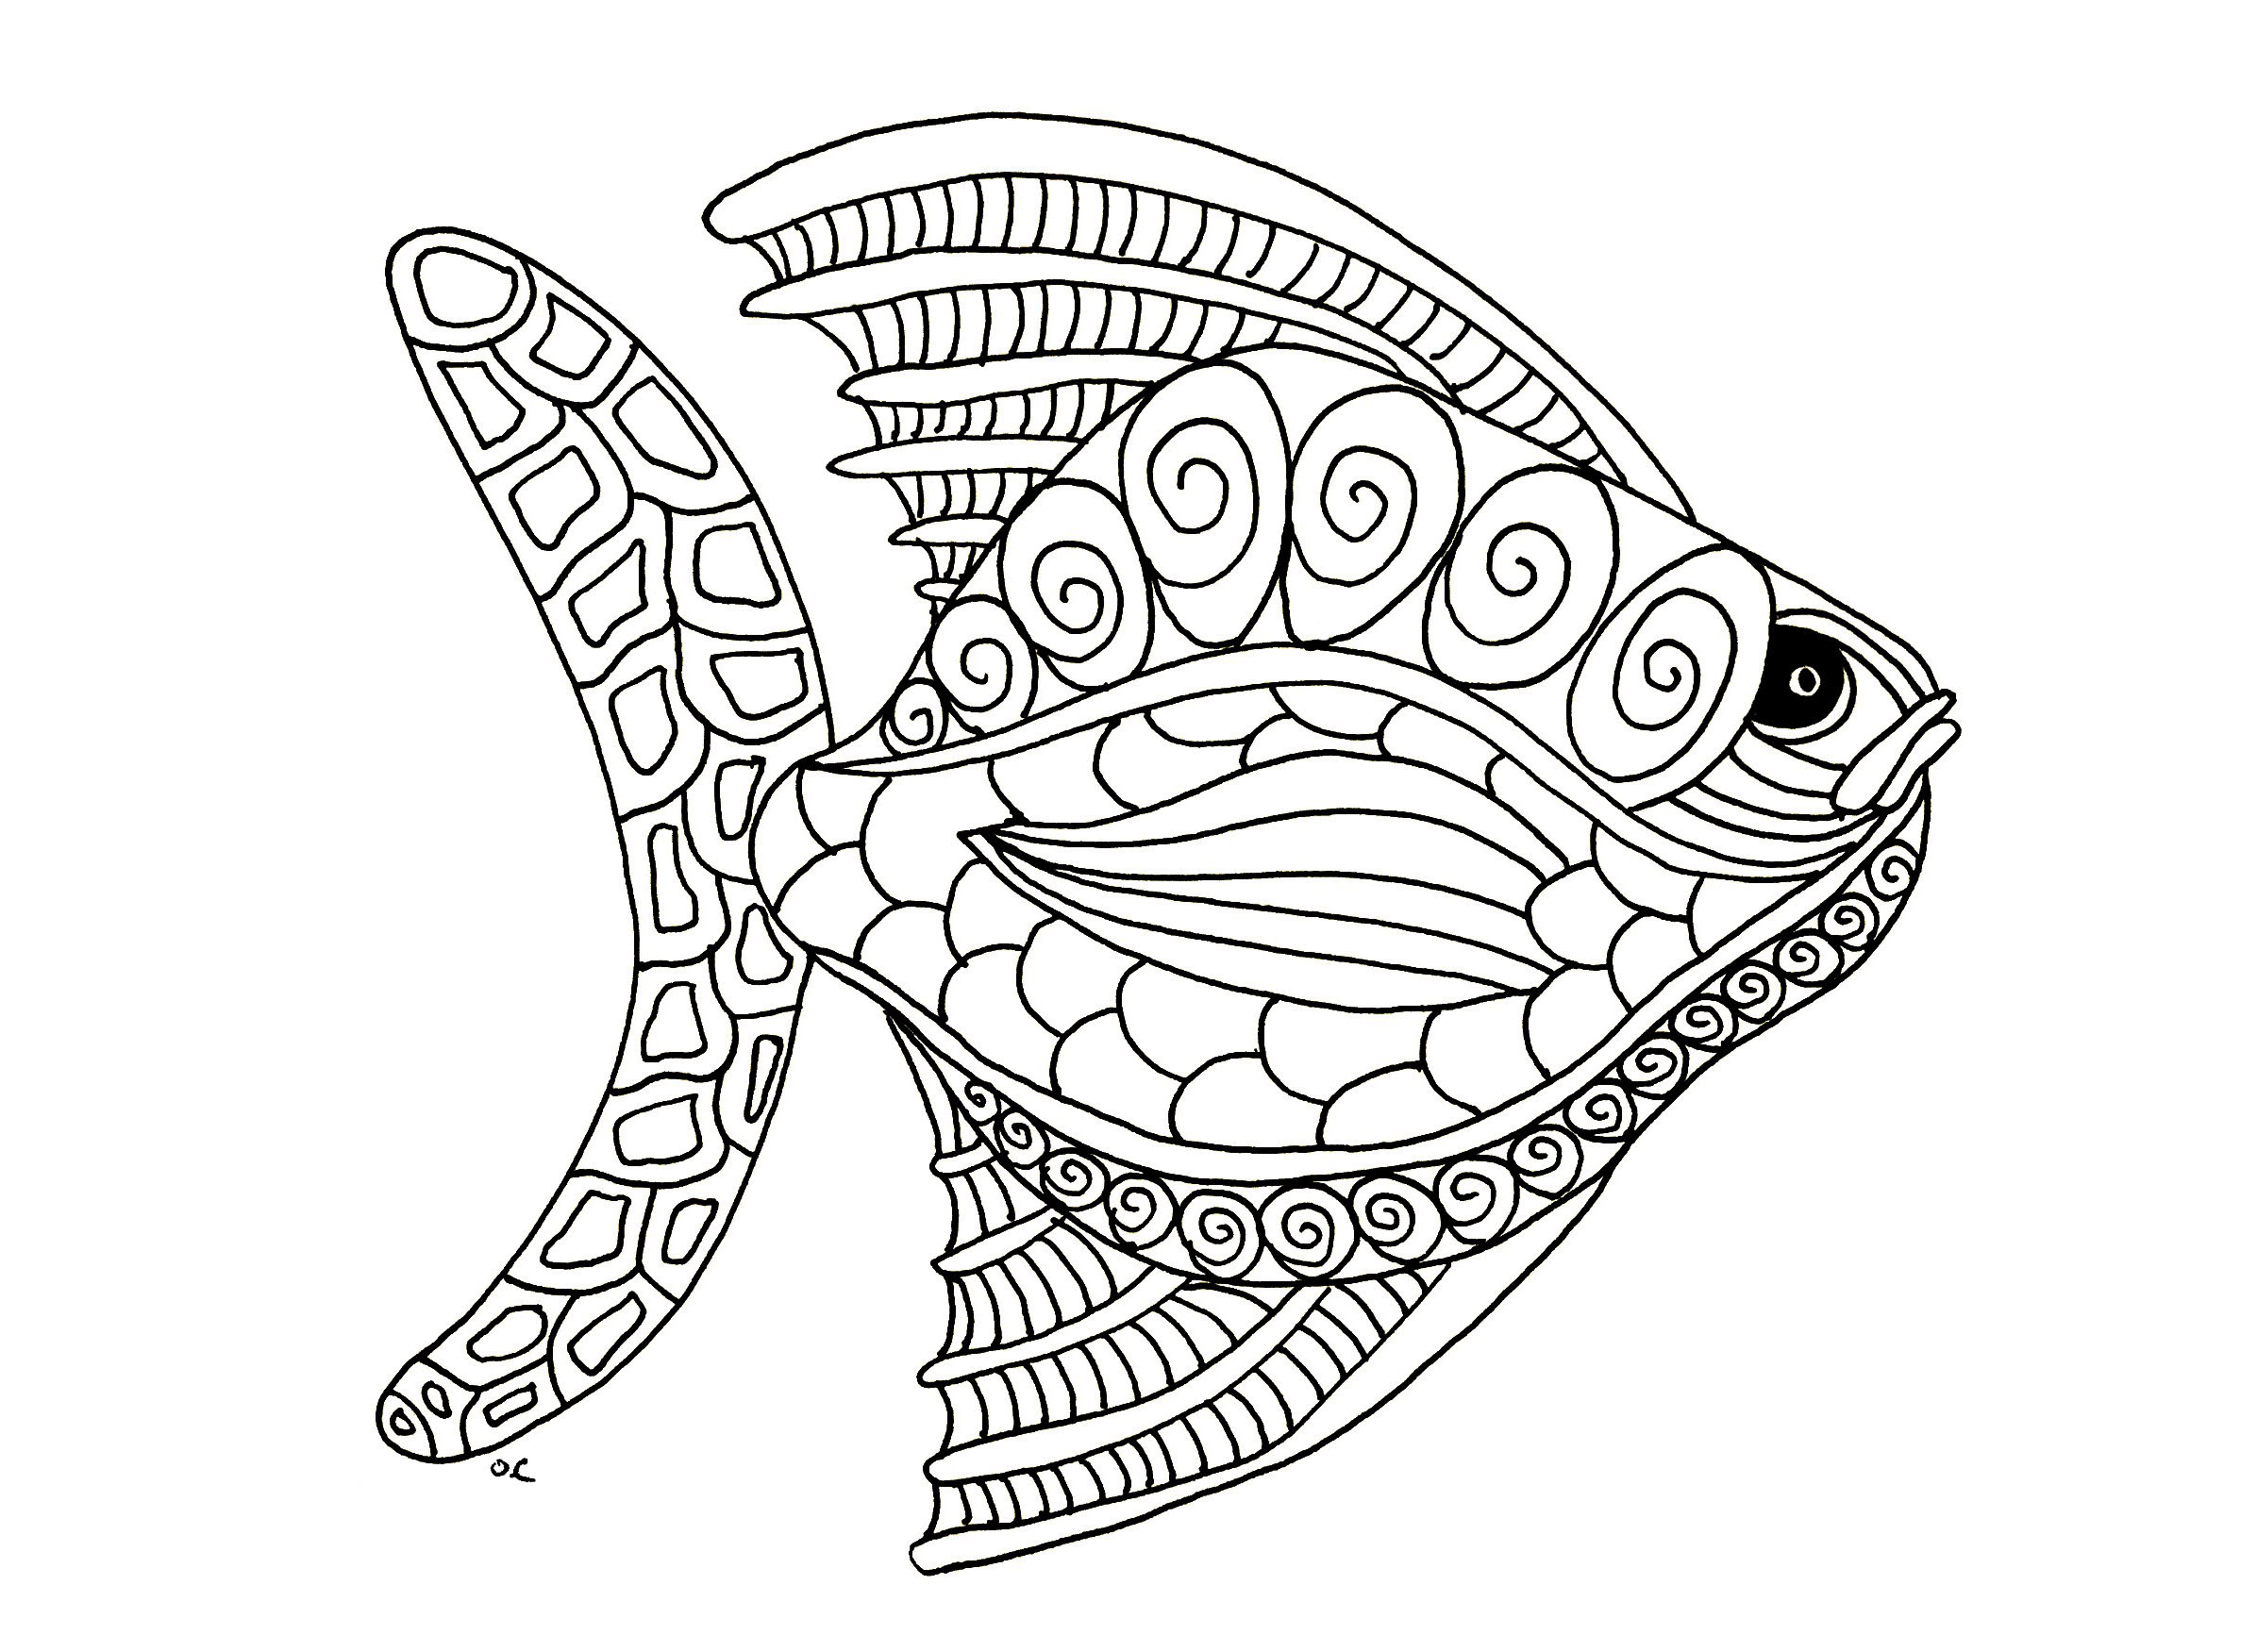 Animal Coloring Pages for Adults - Best Coloring Pages For ... If you feel consequently, i'l m provide you with some image once again beneath